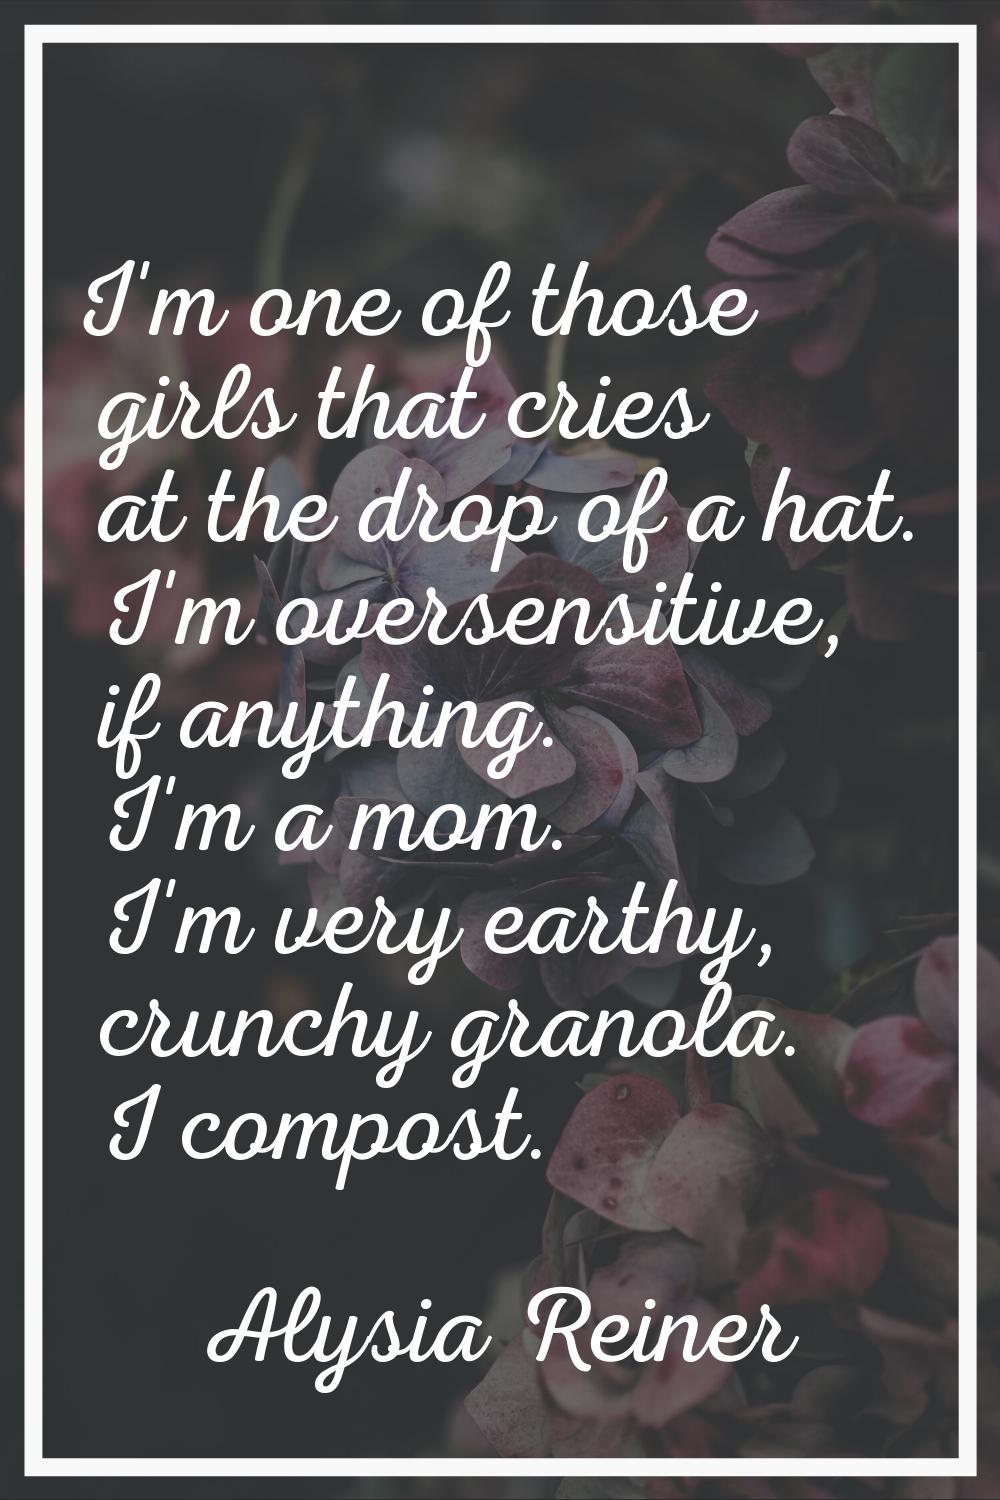 I'm one of those girls that cries at the drop of a hat. I'm oversensitive, if anything. I'm a mom. 